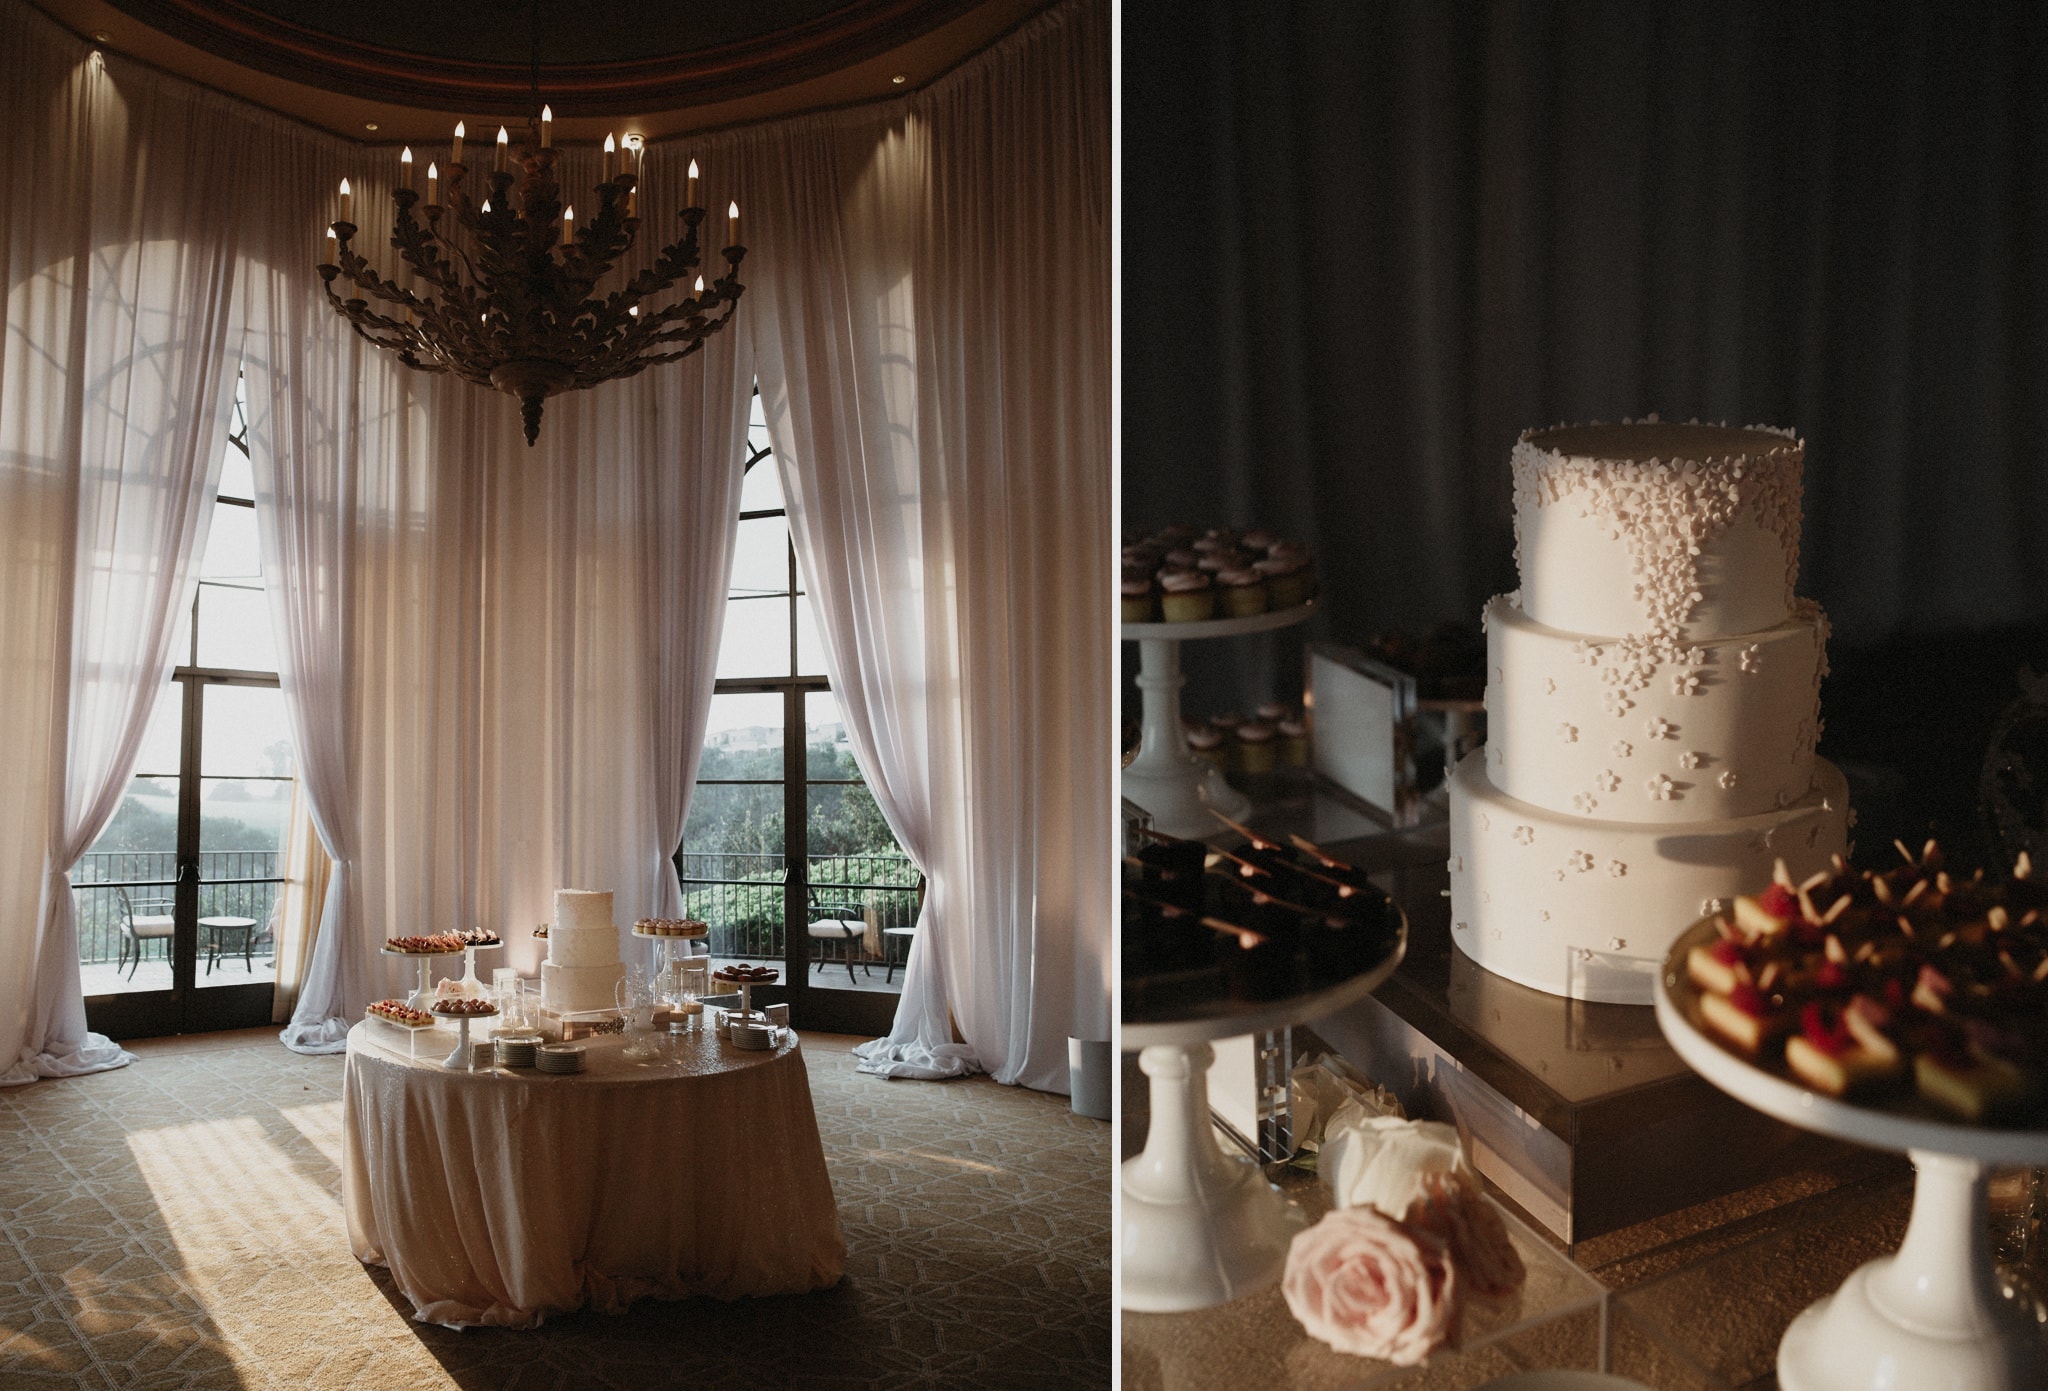 A table at an elegant wedding at The Resort at Pelican Hill with the wedding cake and treats sits before large windows with long white drapes.